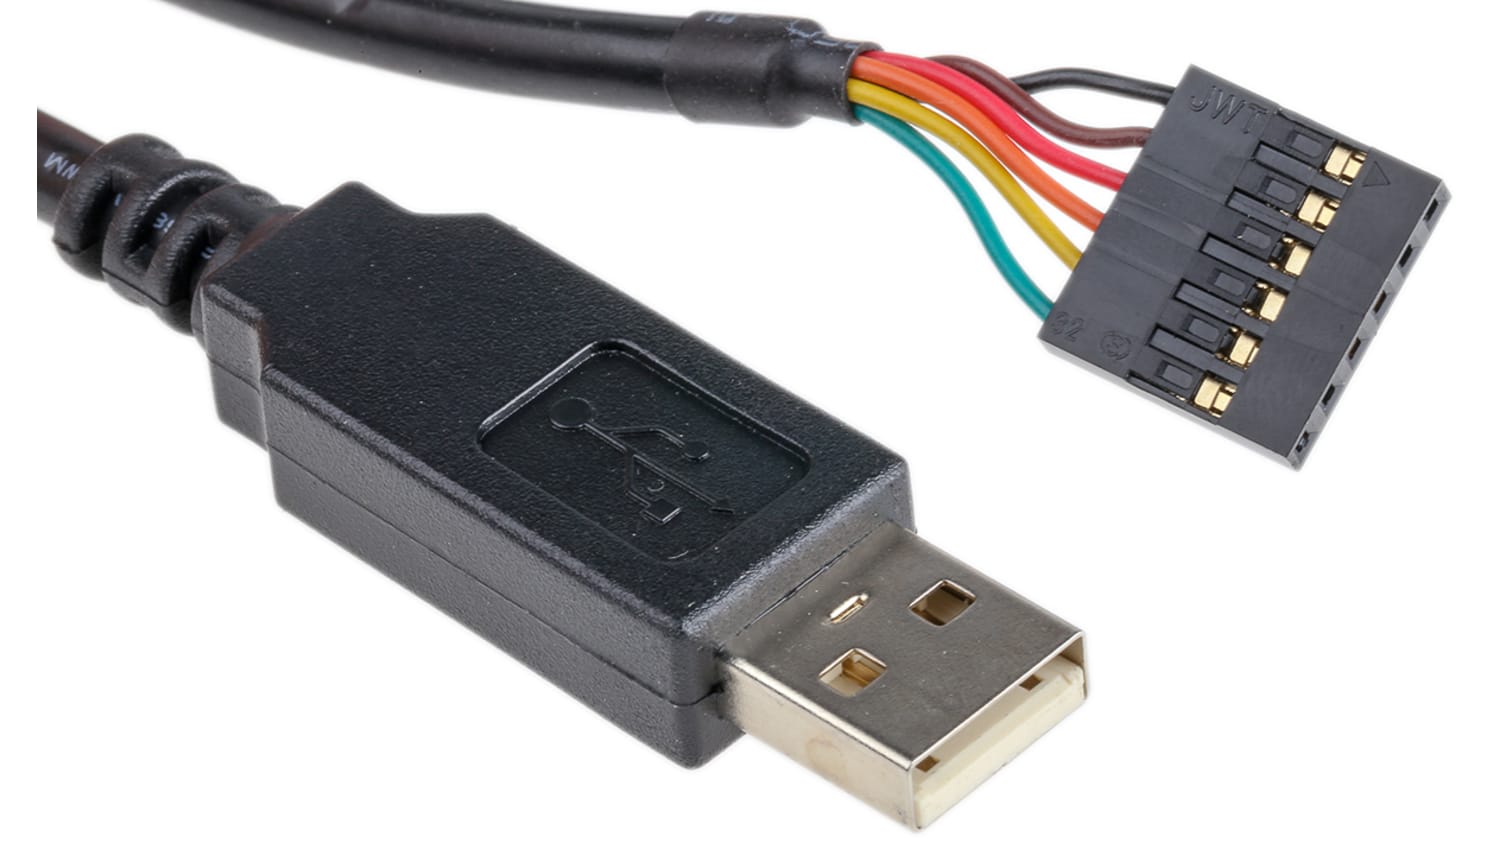 USB-SERIAL CABLE, Ftdi Chip, 3.3 V Ttl Cable Embout USB vers Uart Cable -  AliExpress